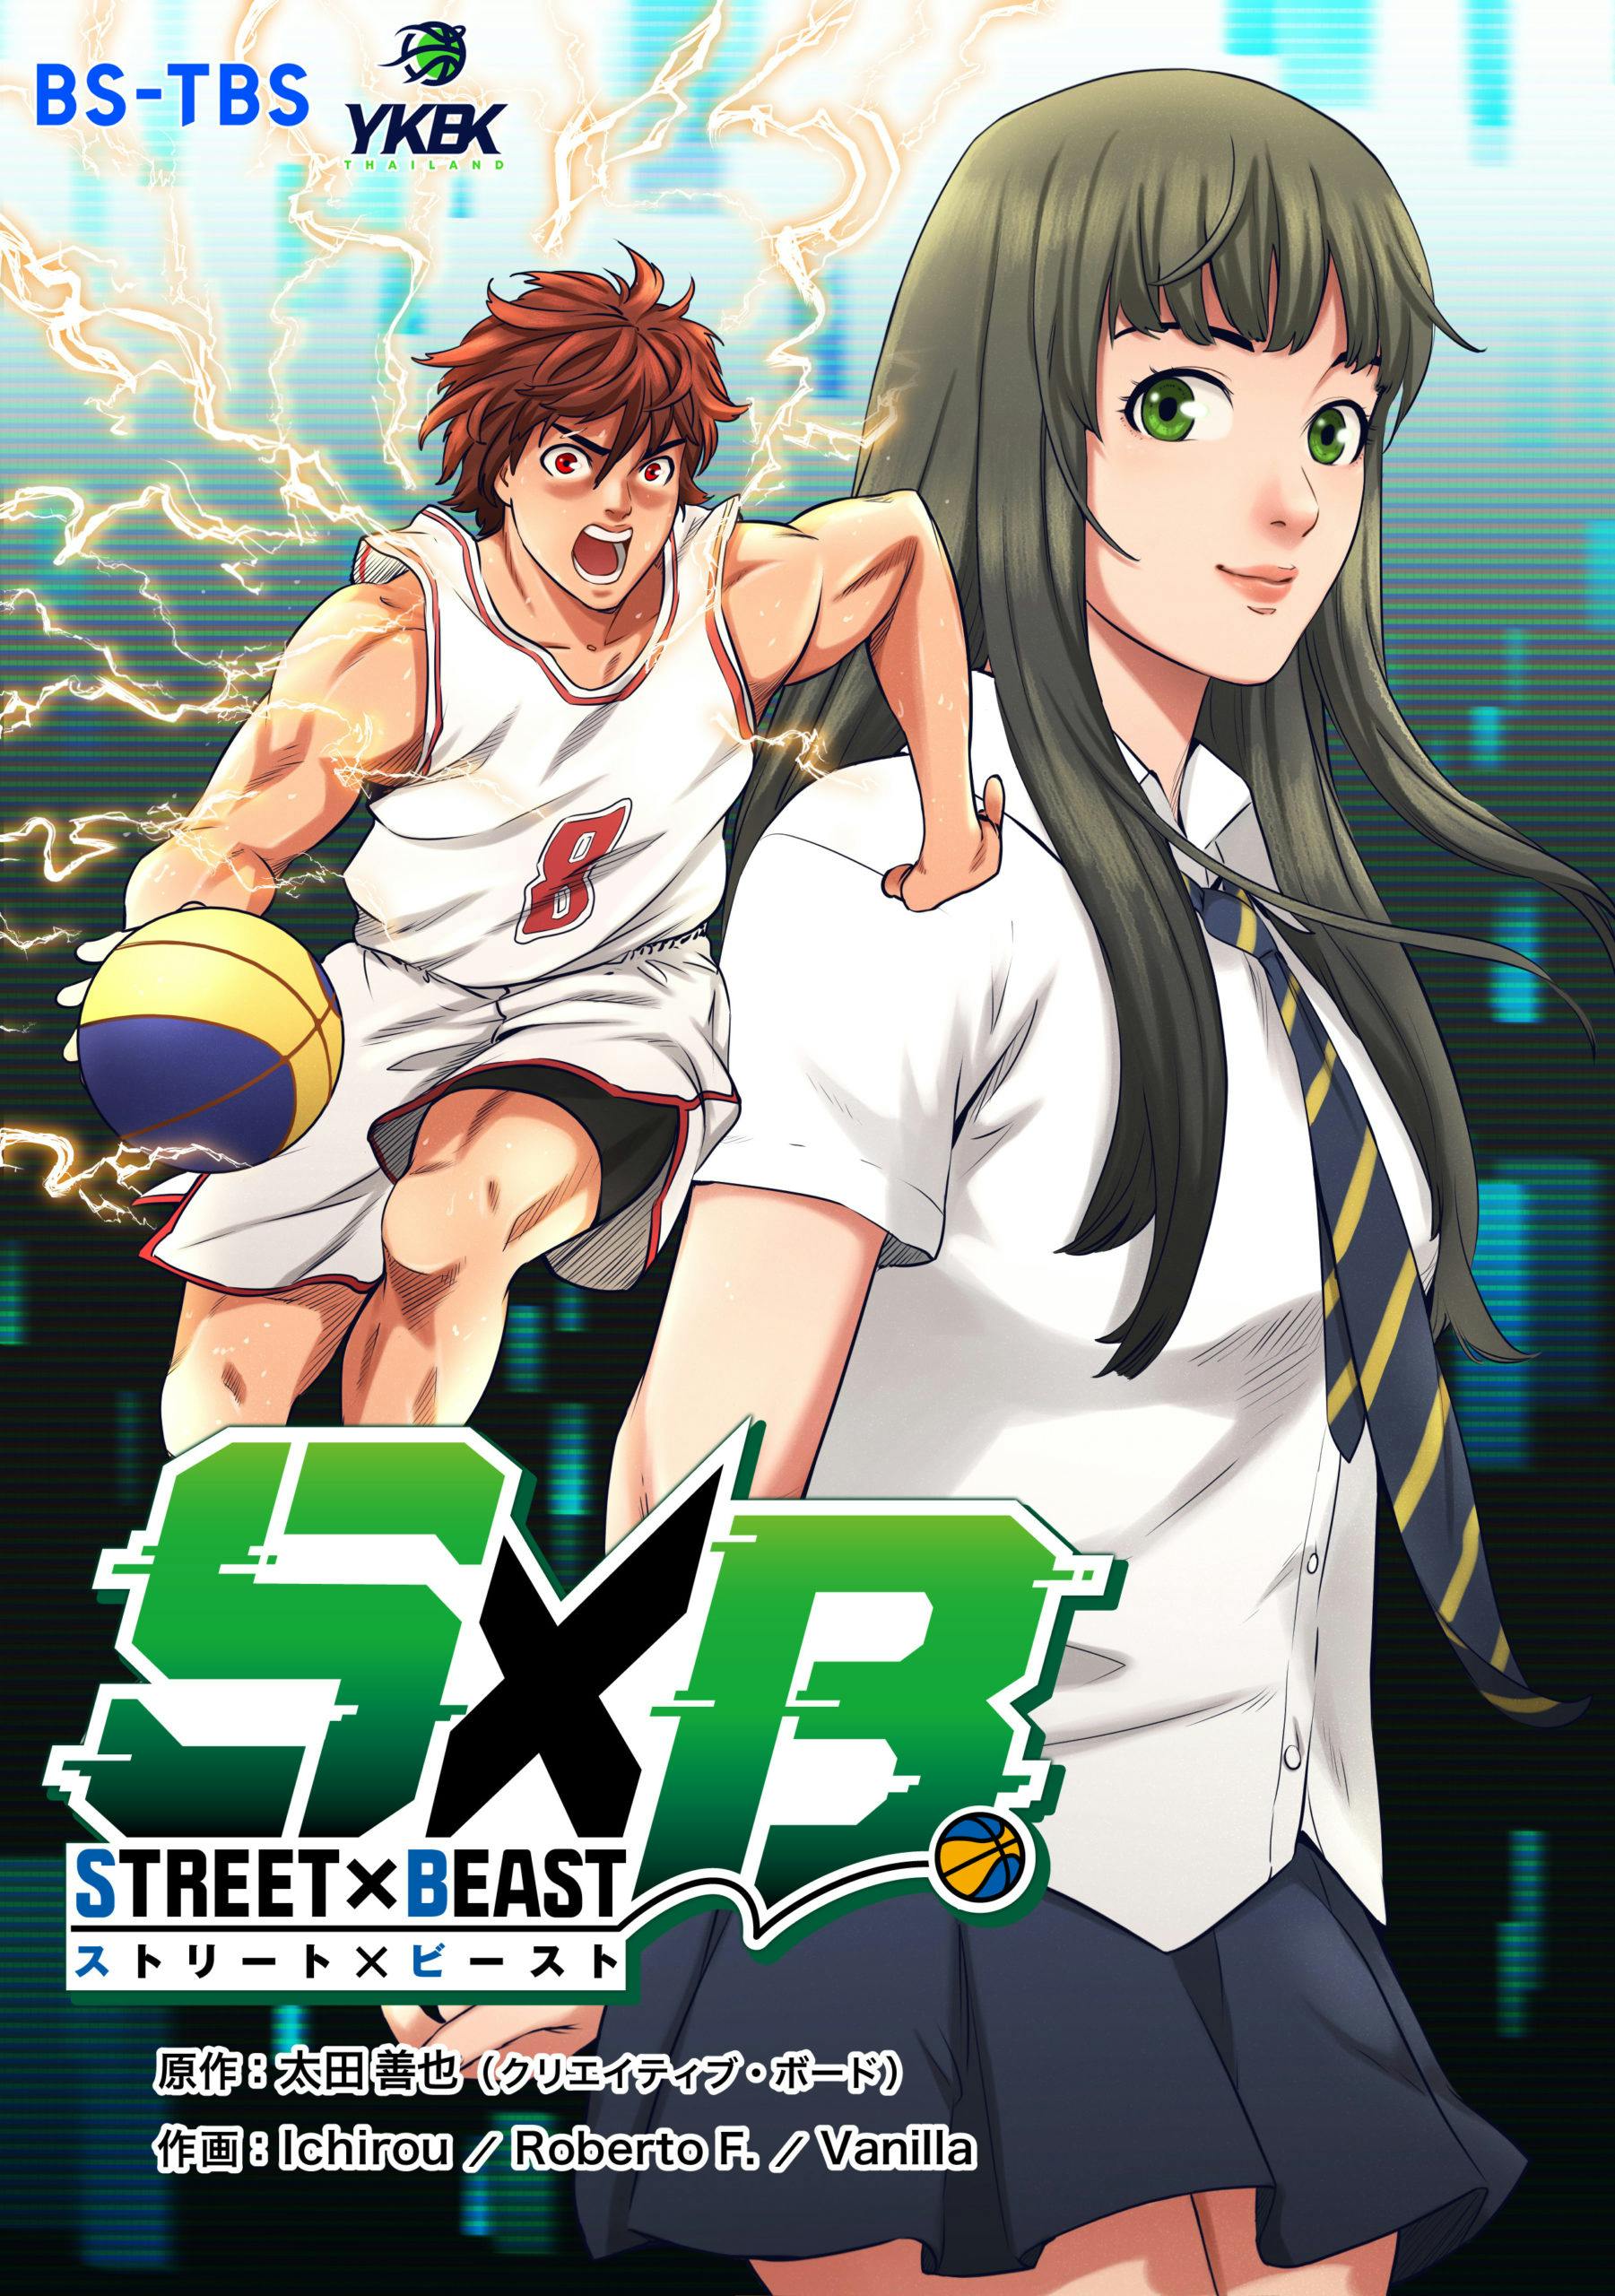 First in Japan! An ambitious work depicting 3x3 basketball, which became an official event at the Tokyo Olympics 2020, is now available on WEBTOON!